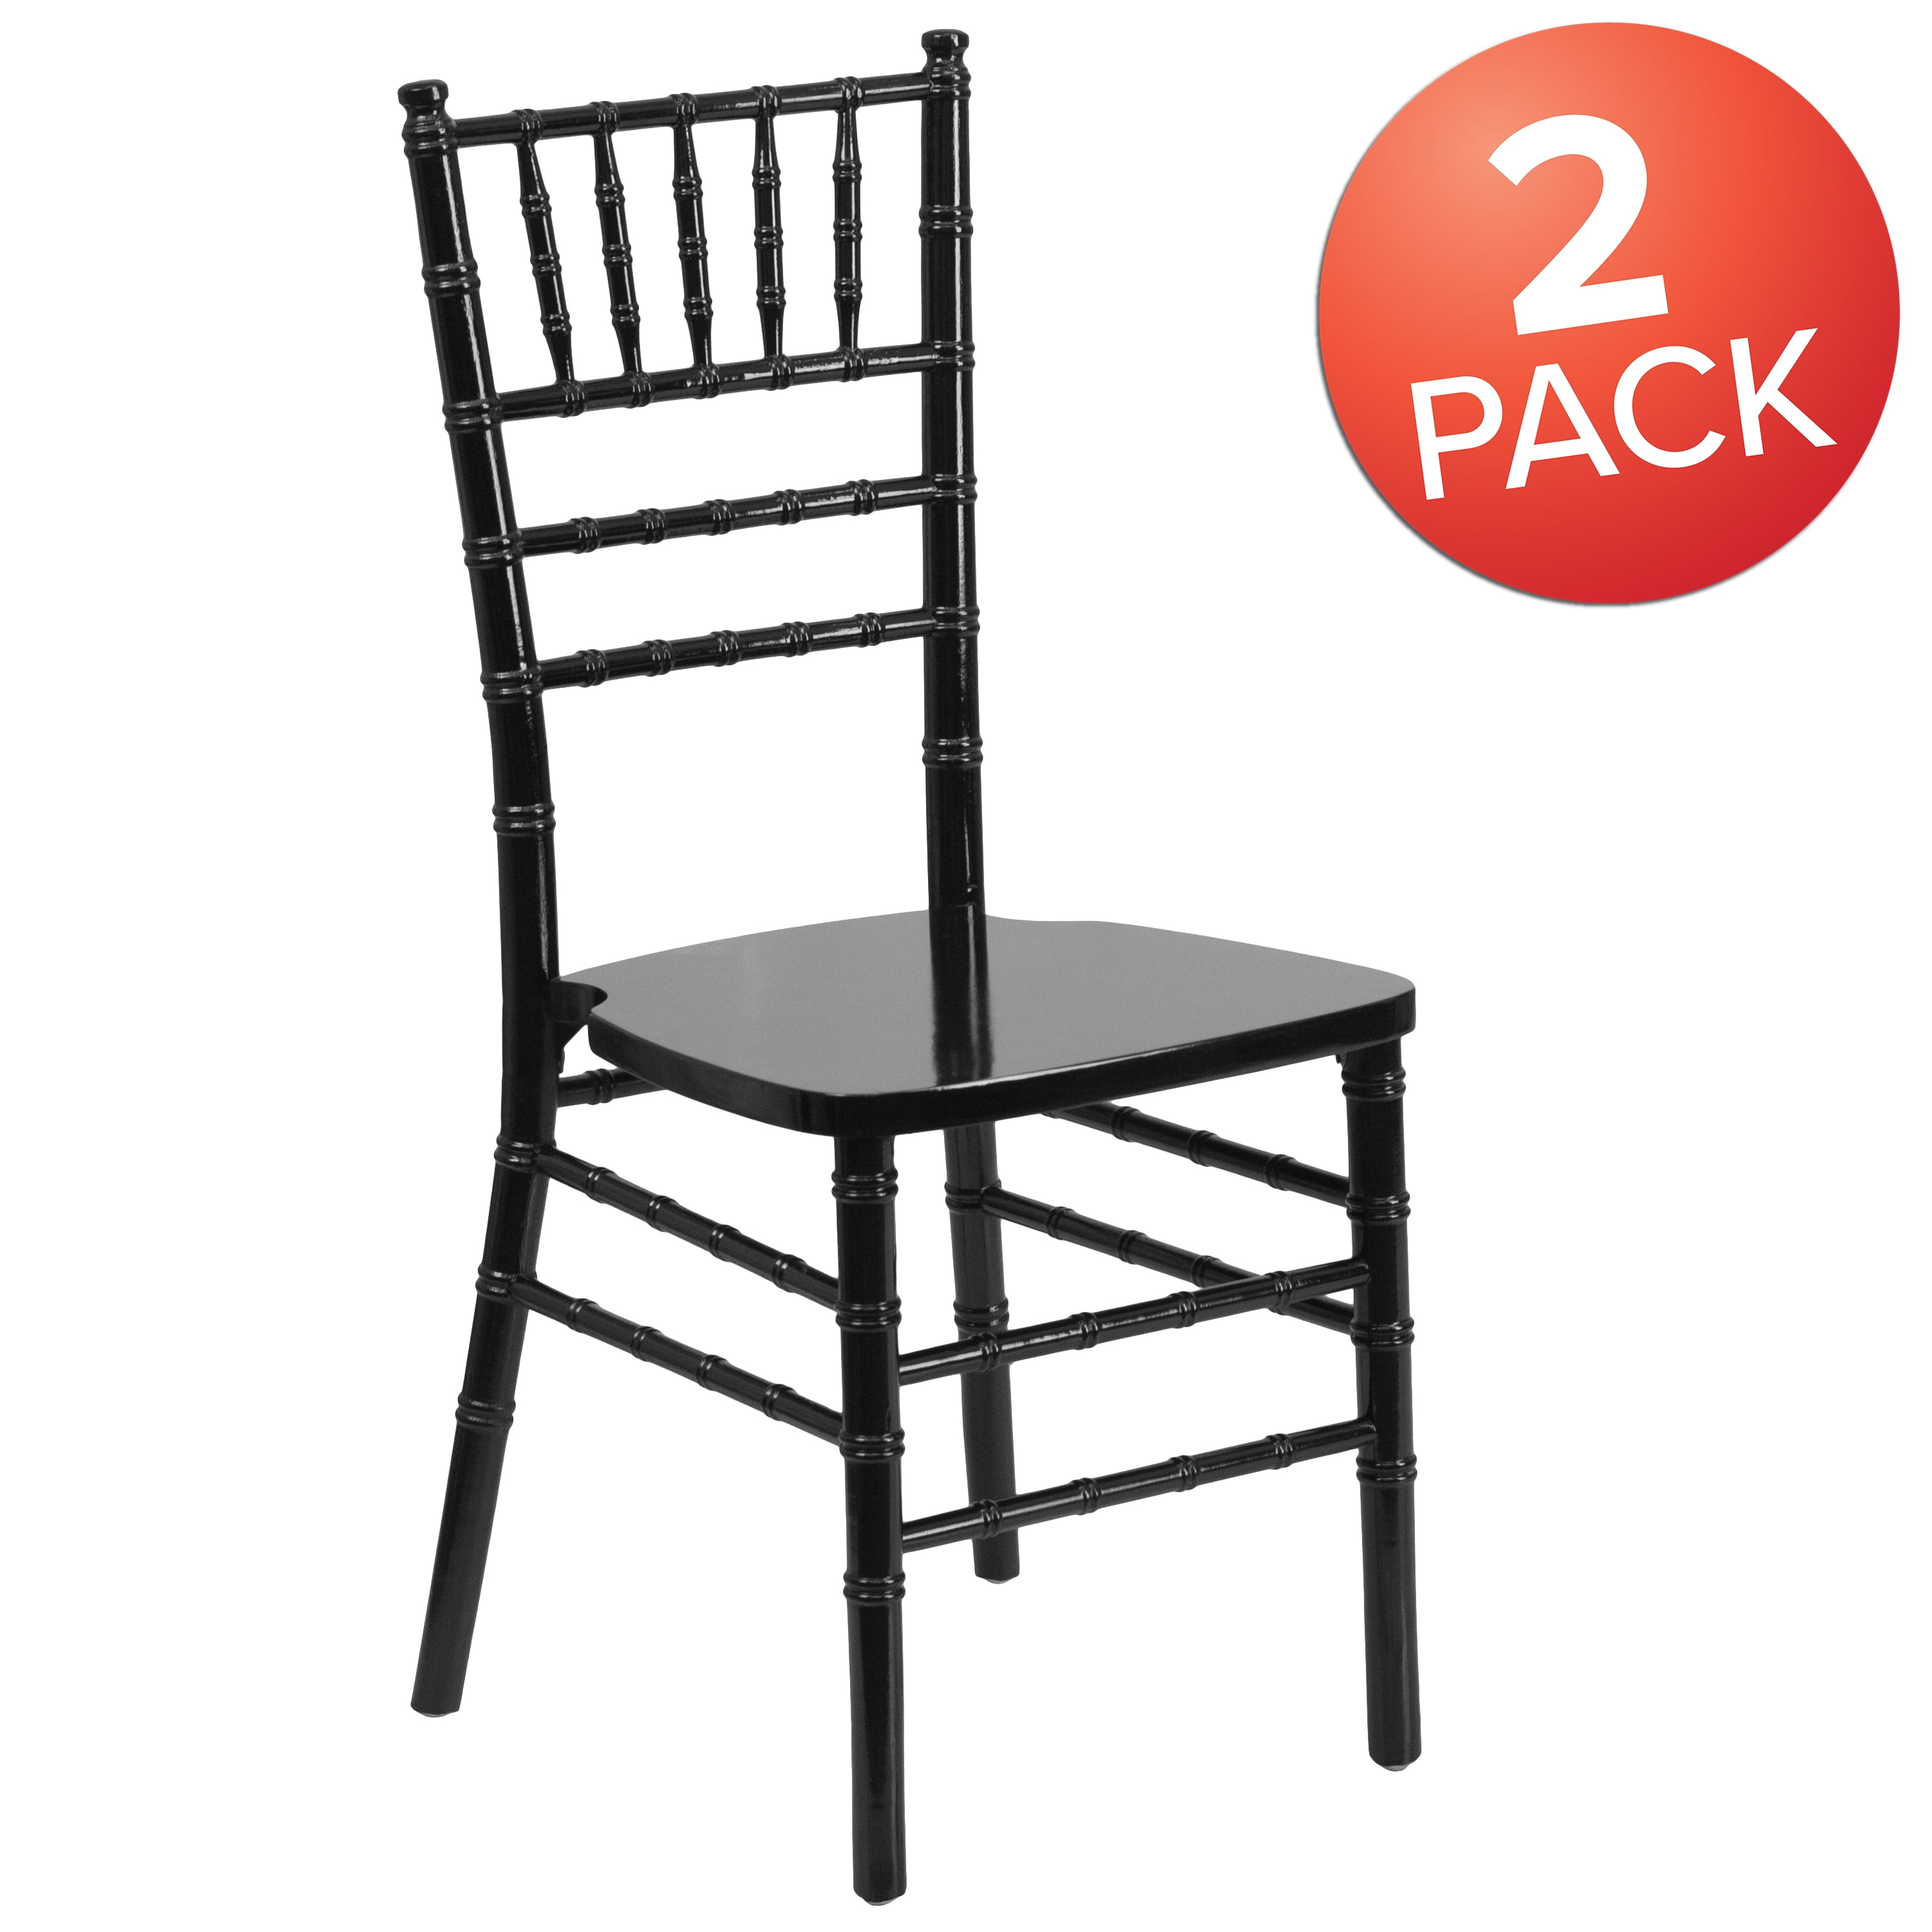 Photo 1 of (OPENED FOR INSPECTION)
Flash Furniture 2-Pack HERCULES Series Wood Chiavari Chair, Multiple Colors